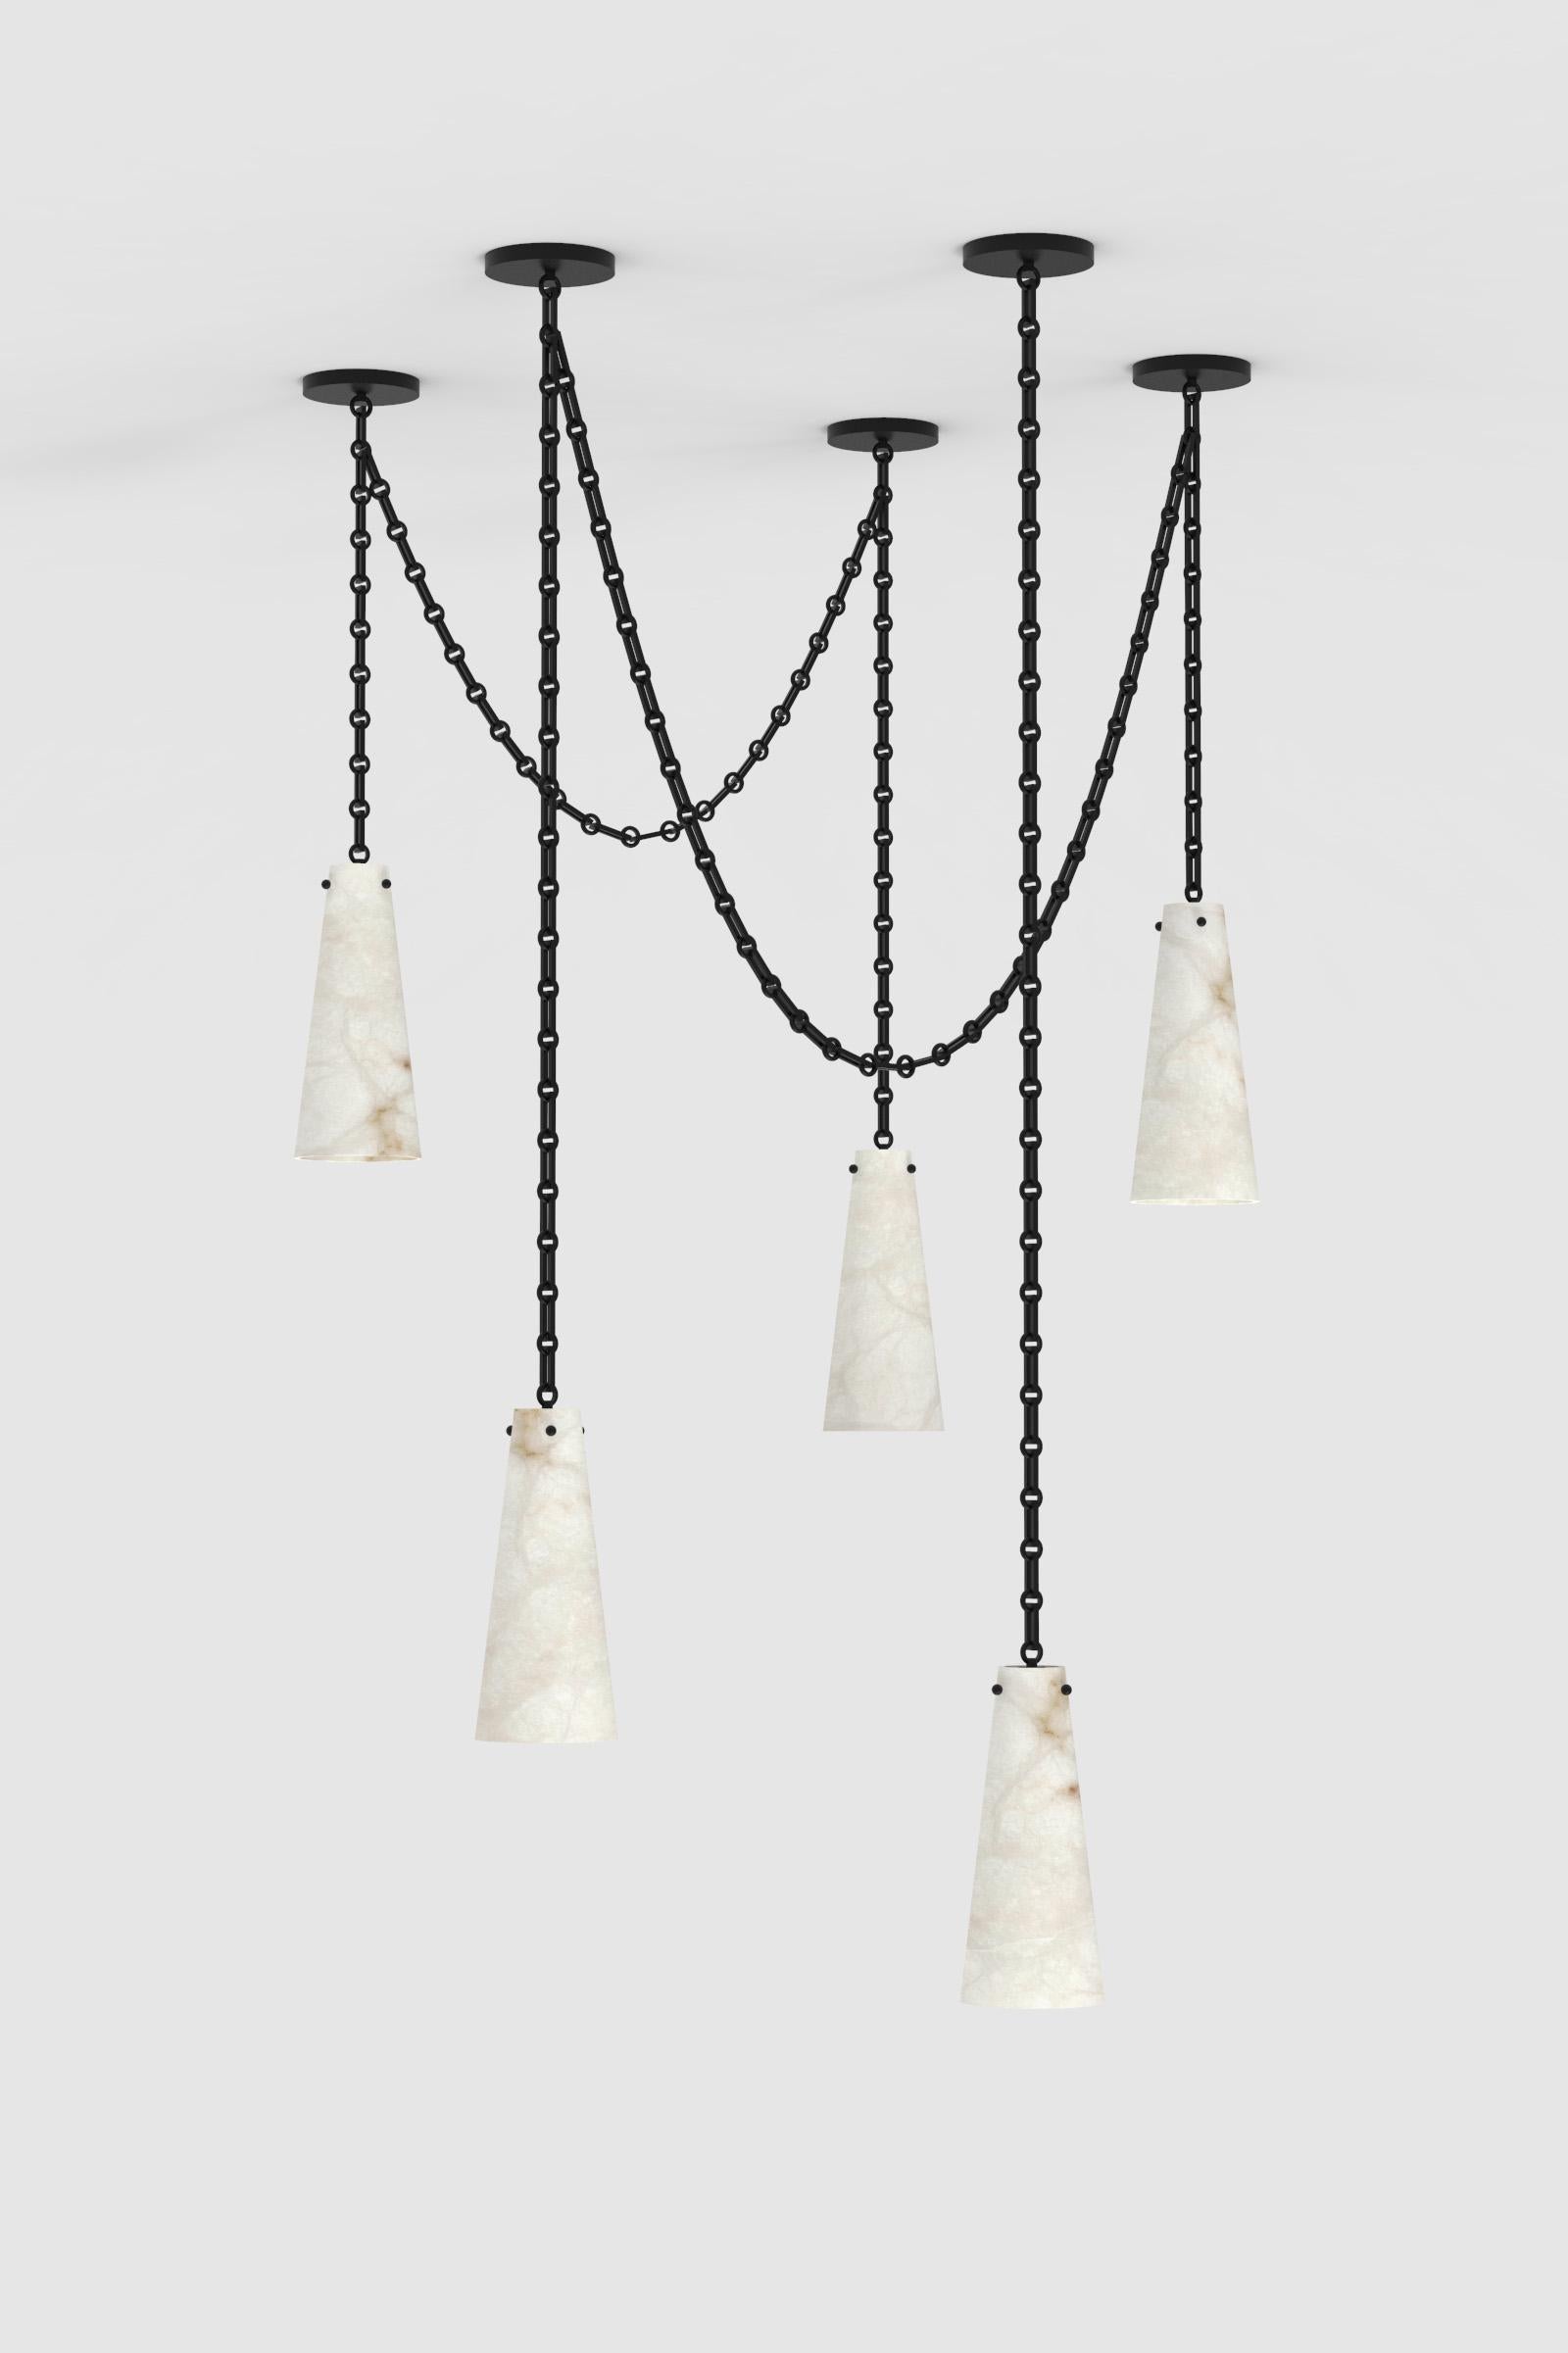 Orphan Work 202A-5 chandelier BLK, 2021
Shown in alabaster with blackened brass
Available in brushed brass and blackened brass
Measures: 15” H x 6 1/2” W
Height and width to order*
Canopy 6